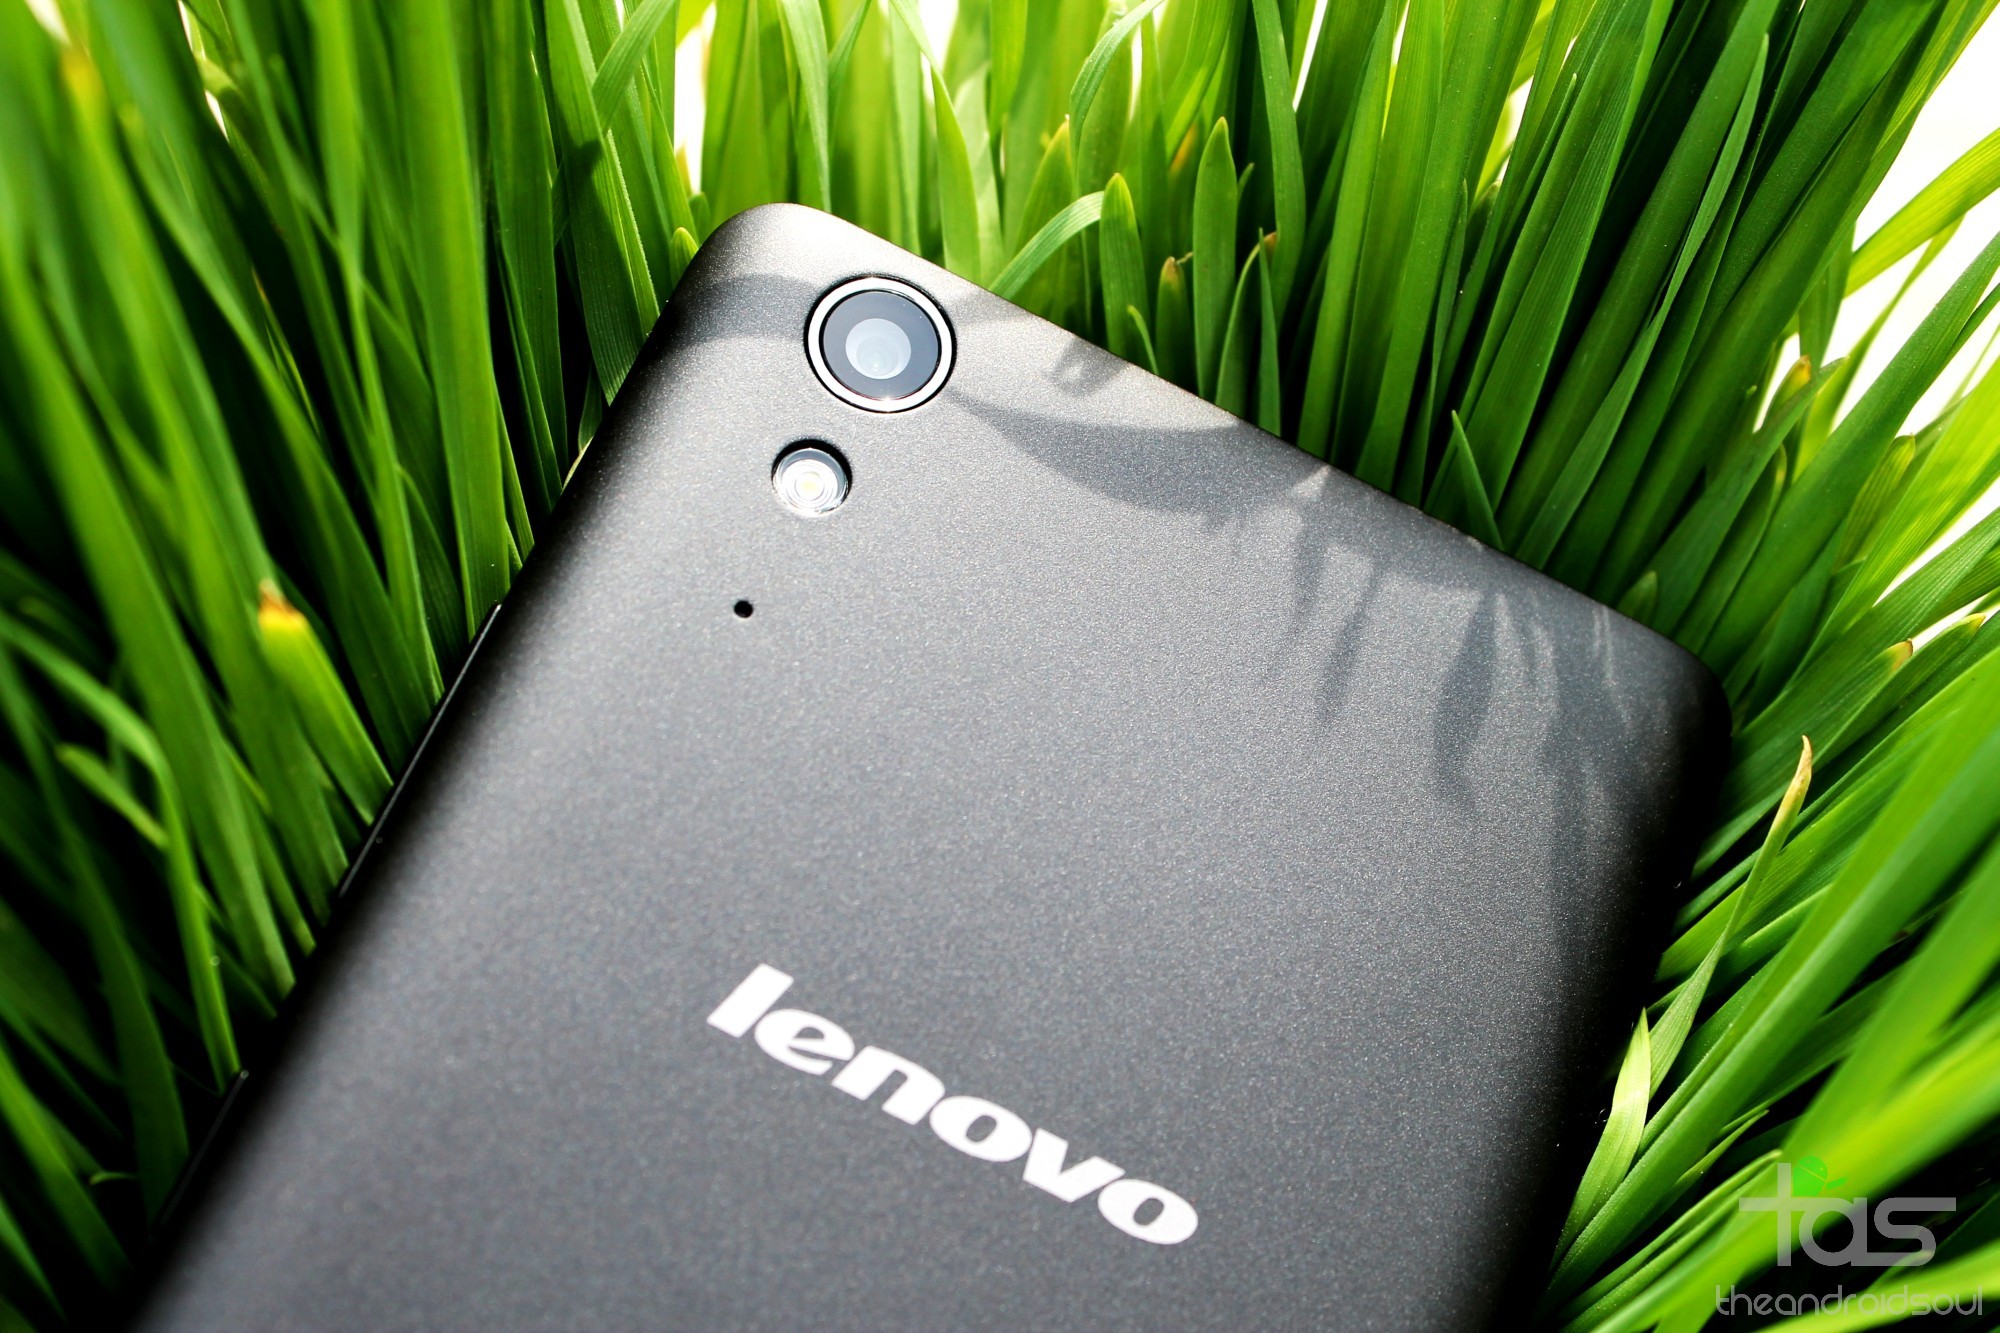 Lenovo A6000 review: can superb display and better battery win the battle?